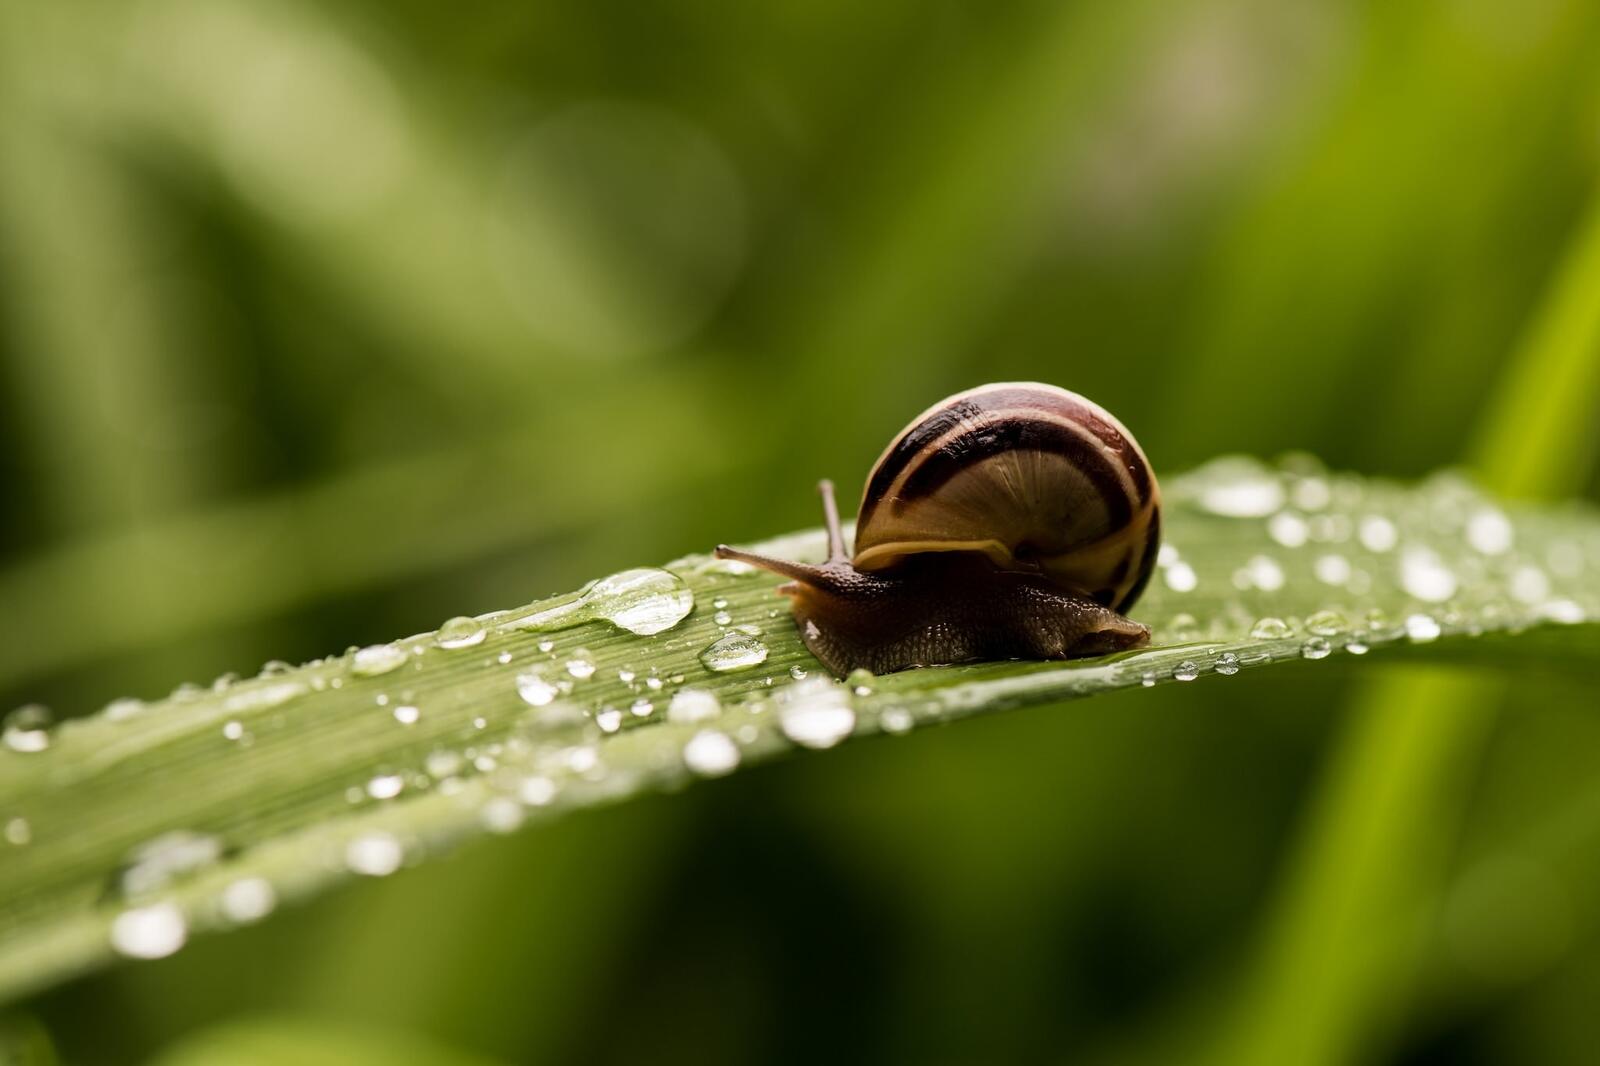 Free photo A snail crawls on a green leaf with raindrops on it